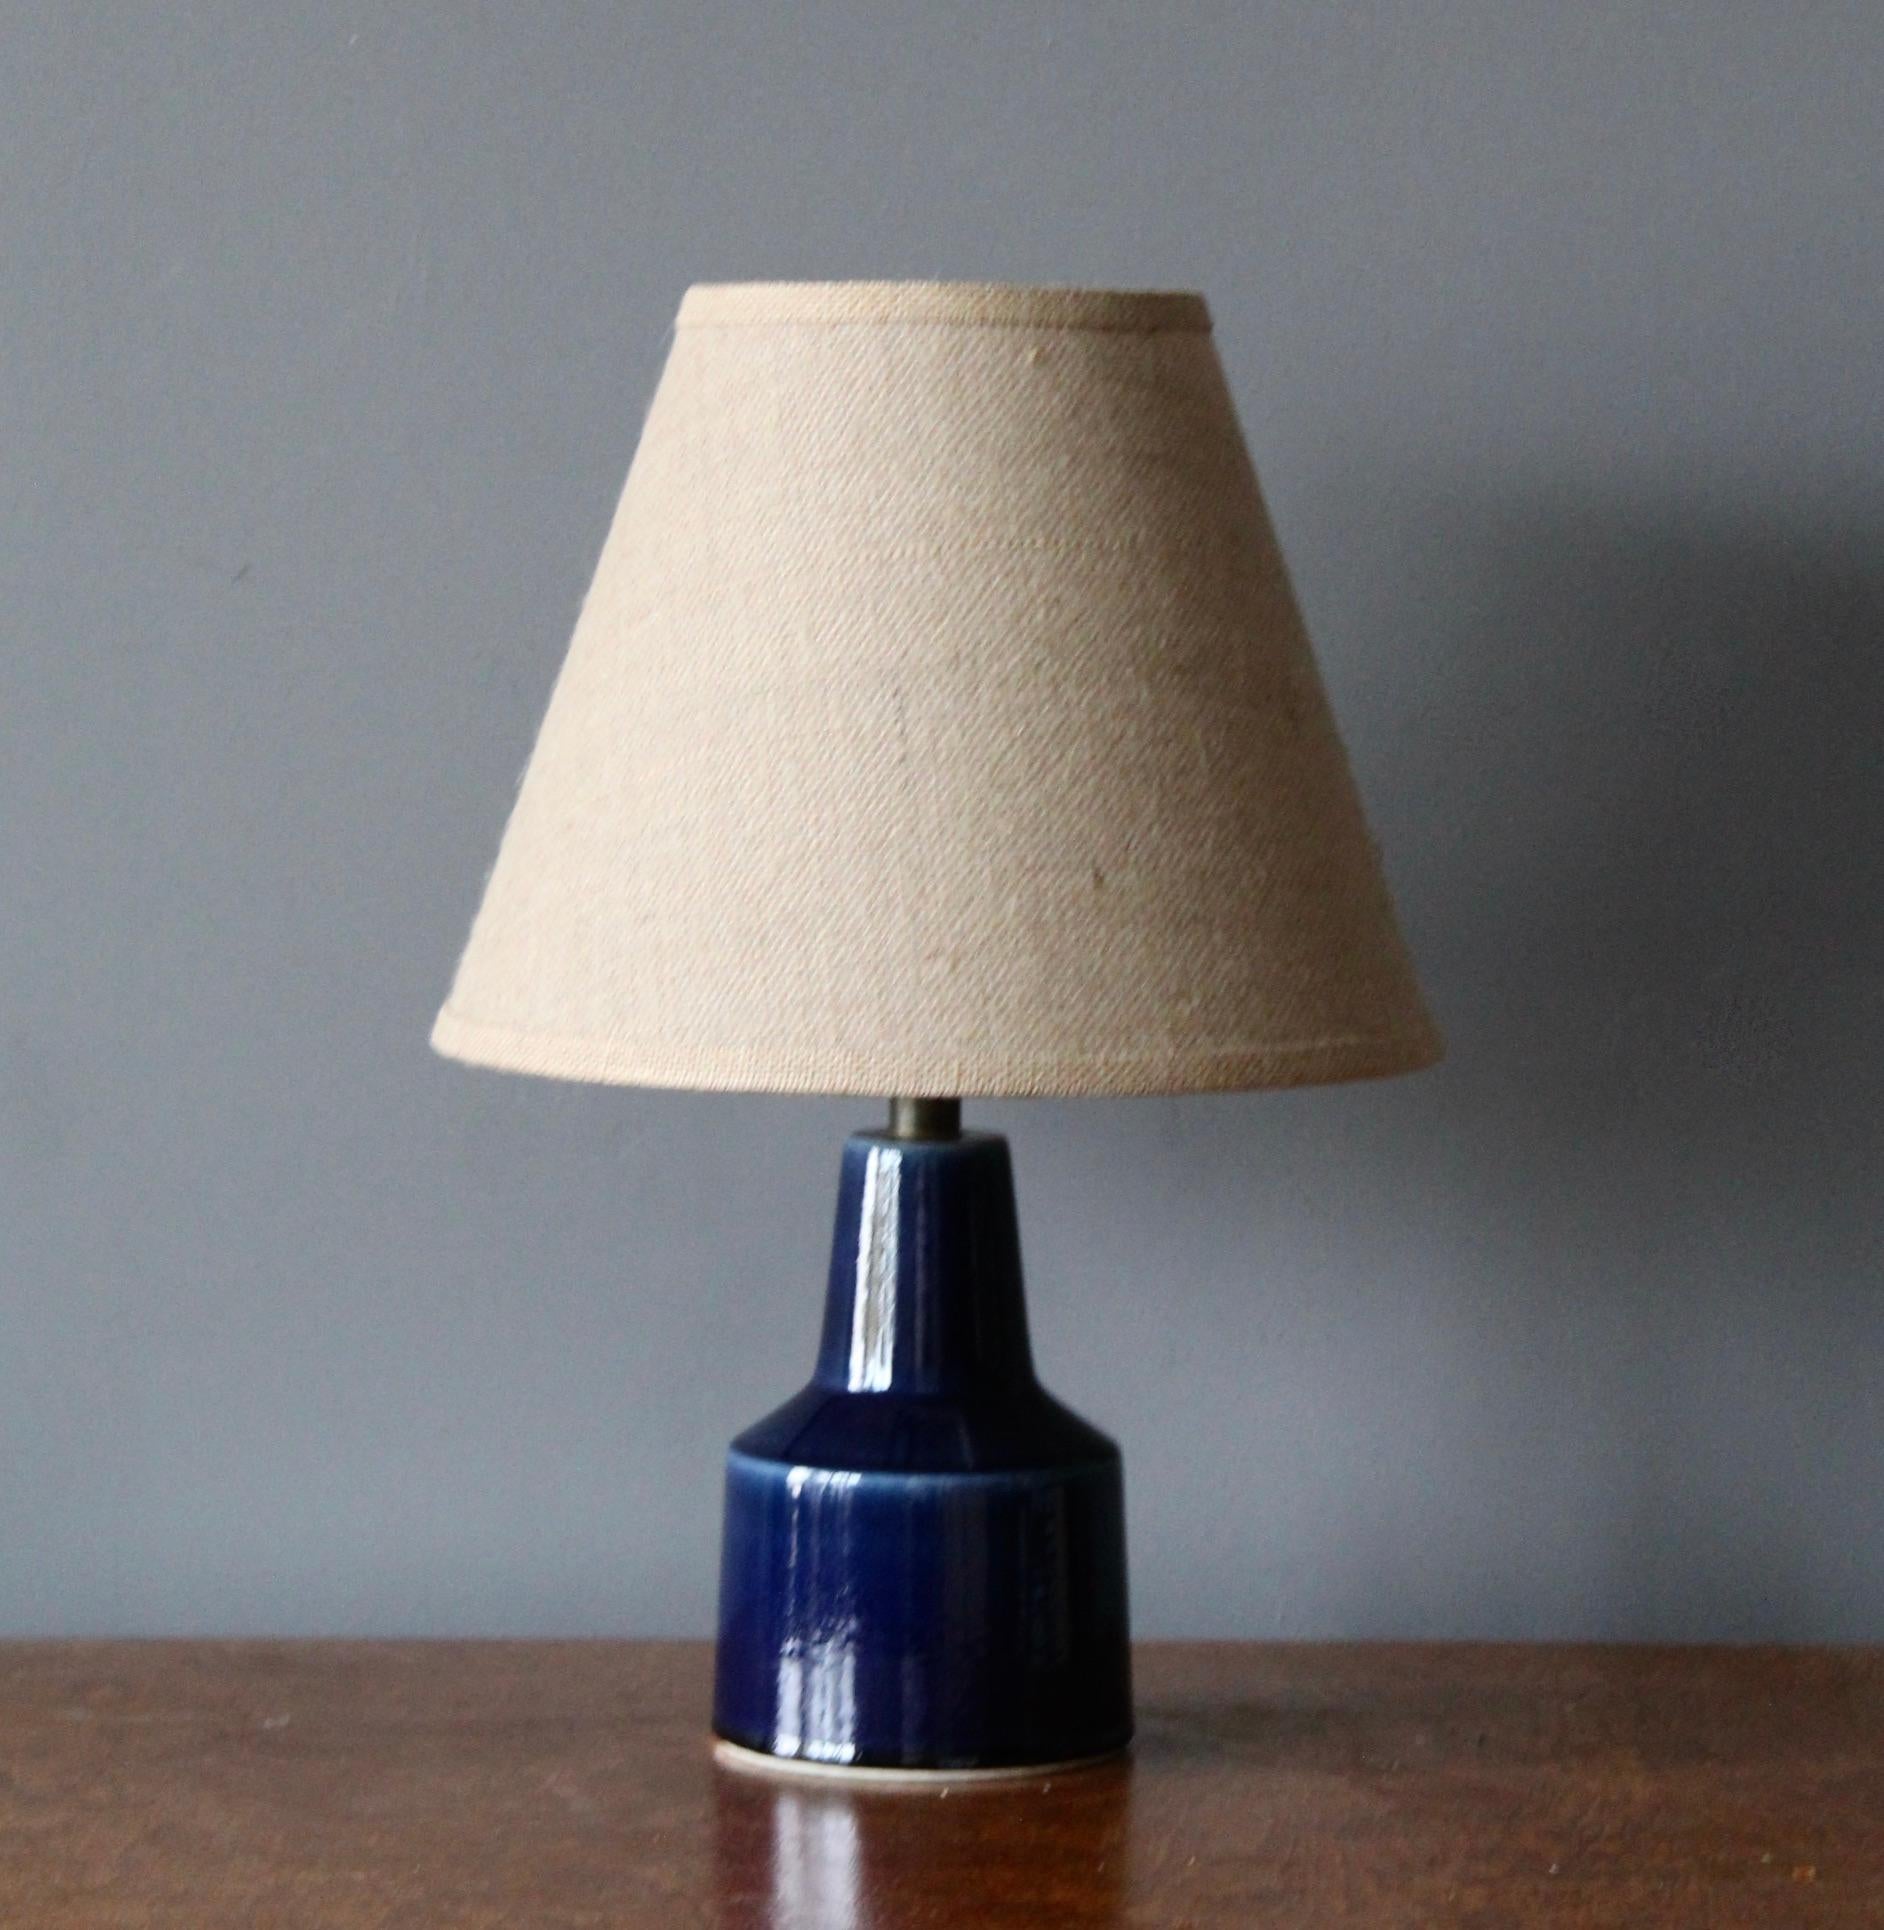 A table lamp designed and produced by Lotte and Gunnar Bostrom. A Danish duo operating in Canada. Produced c. 1960s.

Features blue glazed ceramic, metal. Sold without lampshade. Dimensions stated exclude lampshade, height includes